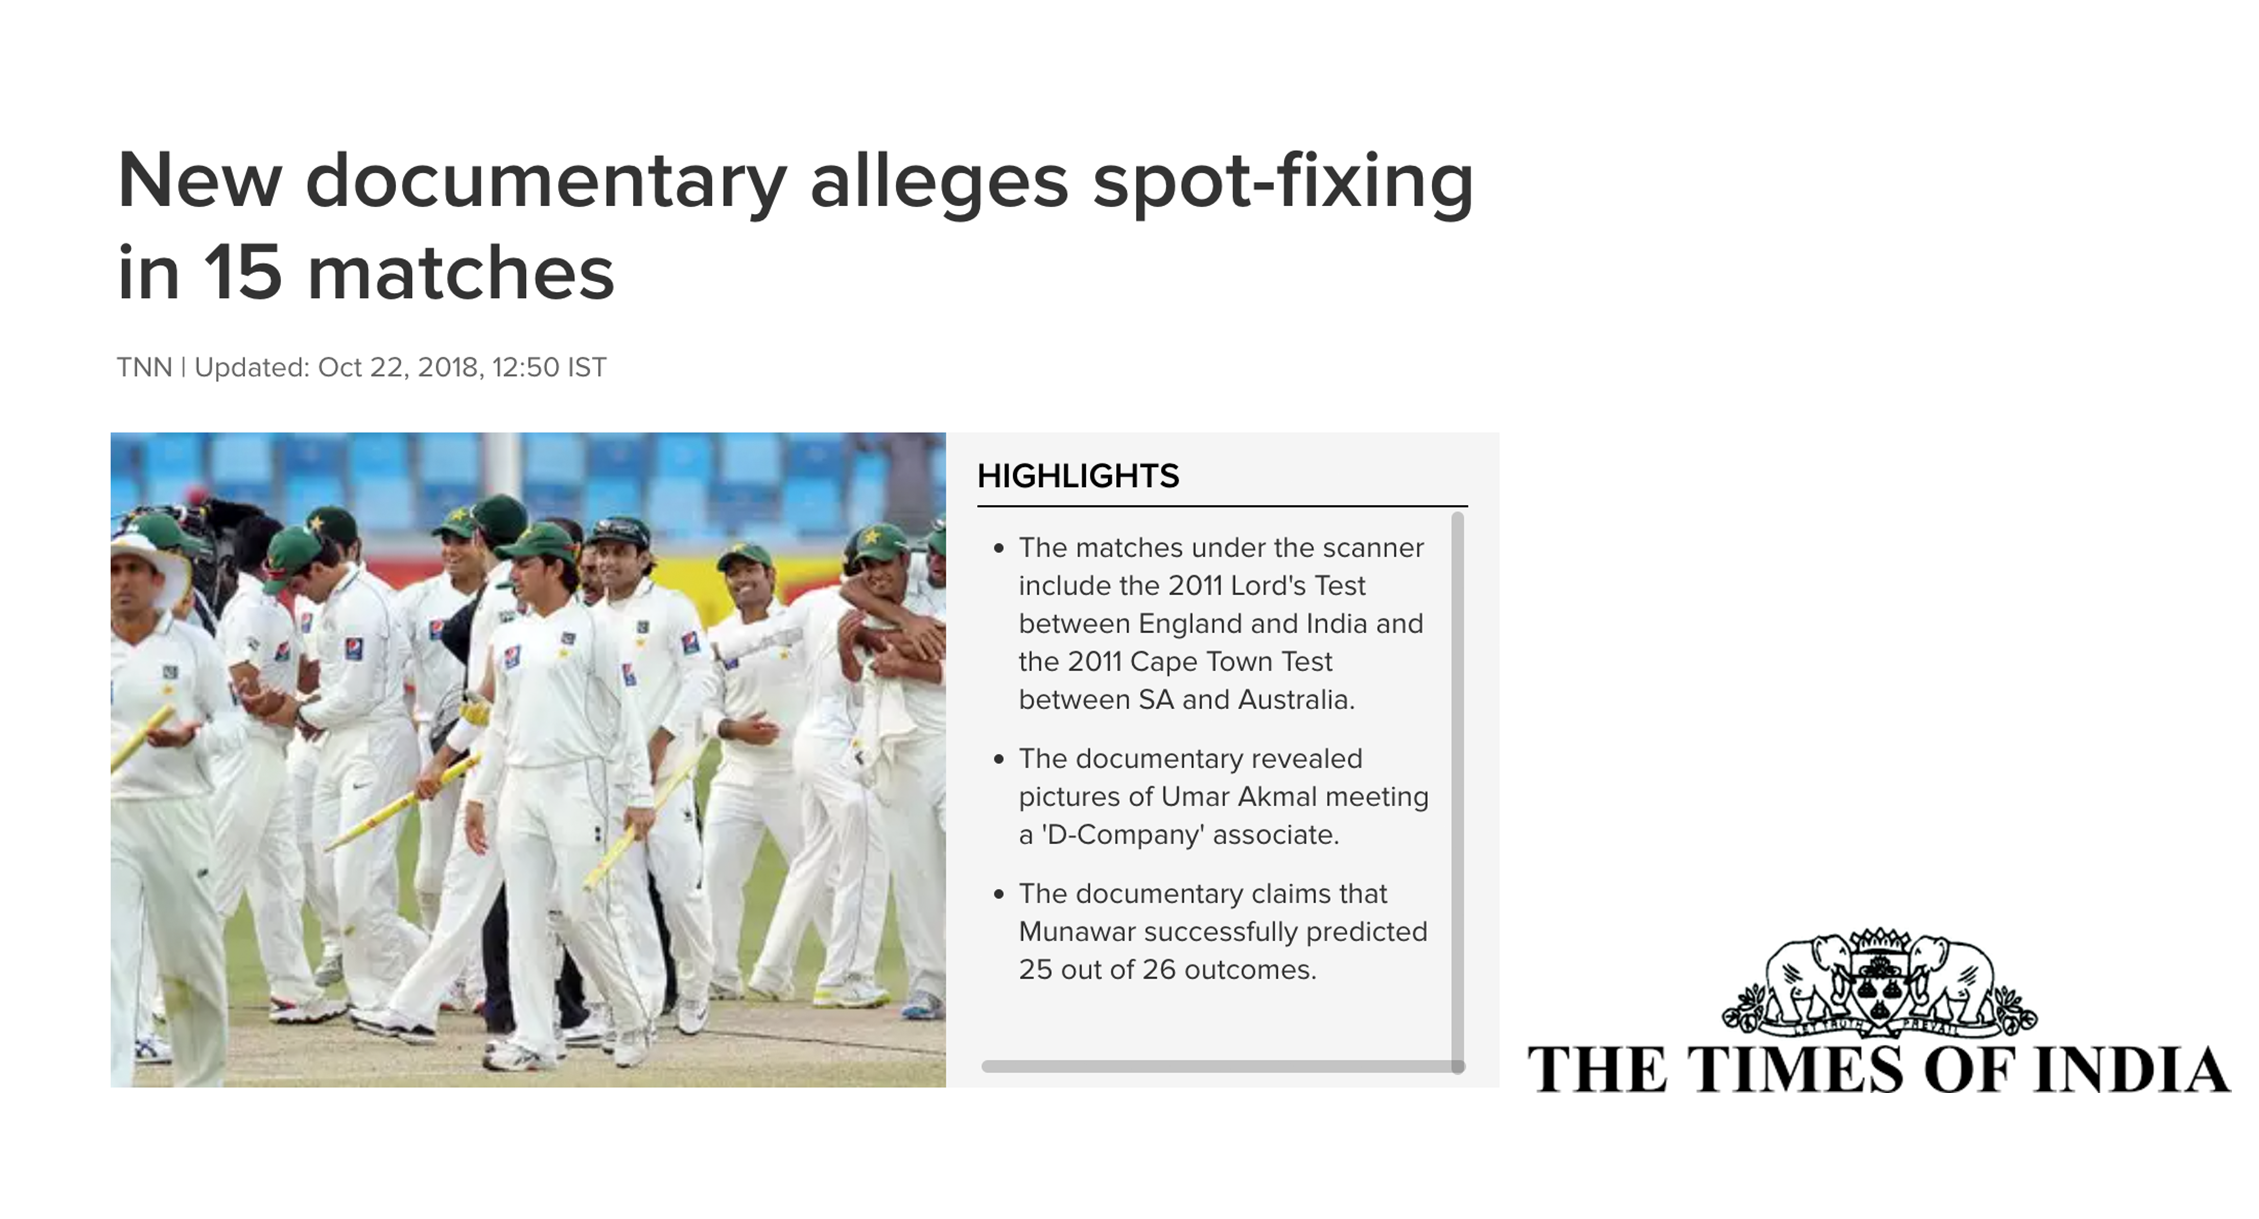 Times of India: New documentary alleges spot-fixing in 15 matches